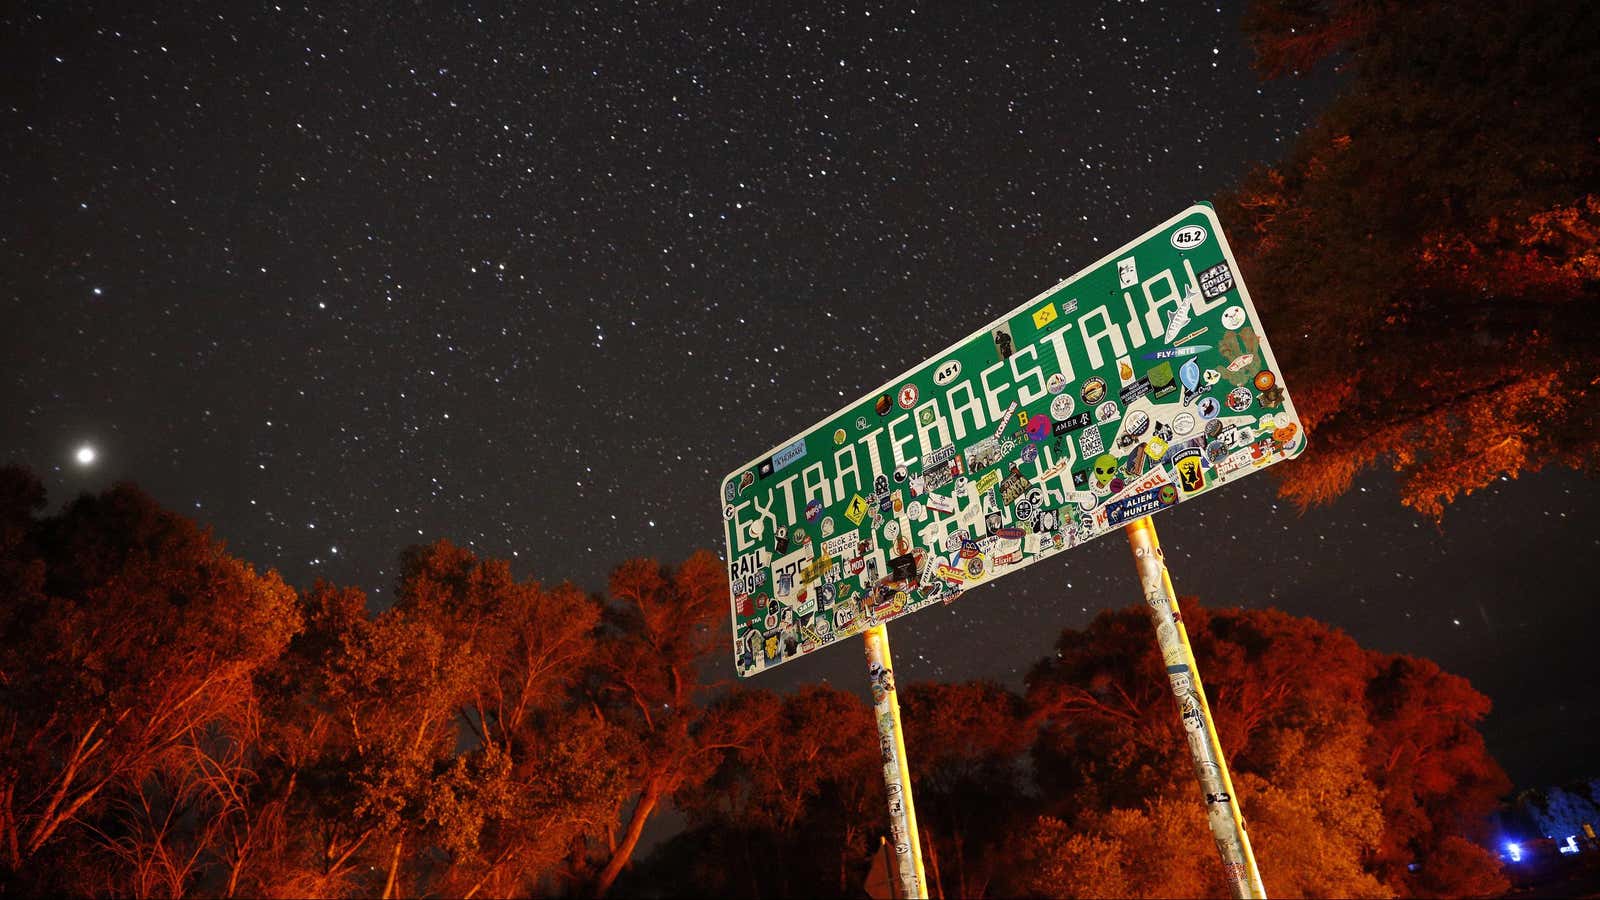 FILE – In this July 22, 2019 file photo, a sign advertises state route 375 as the Extraterrestrial Highway, in Crystal Springs, Nev., on the way to Nevada Test and Training Range near Area 51. A second rural Nevada county prepared Thursday for a “Storm Area 51” event that began as an internet joke but has drawn millions of social media fans. Organizers of the event hope people will gather and try to make their way into the once top-secret U.S. Air Force test area known in popular lore as a site for government studies of outer space aliens. An emergency declaration for Nye County took effect a day after county disaster preparation and sheriff officials told county lawmakers they’re unsure how many — or where — people might show up for events Sept. 20-22. (AP Photo/John Locher, File)